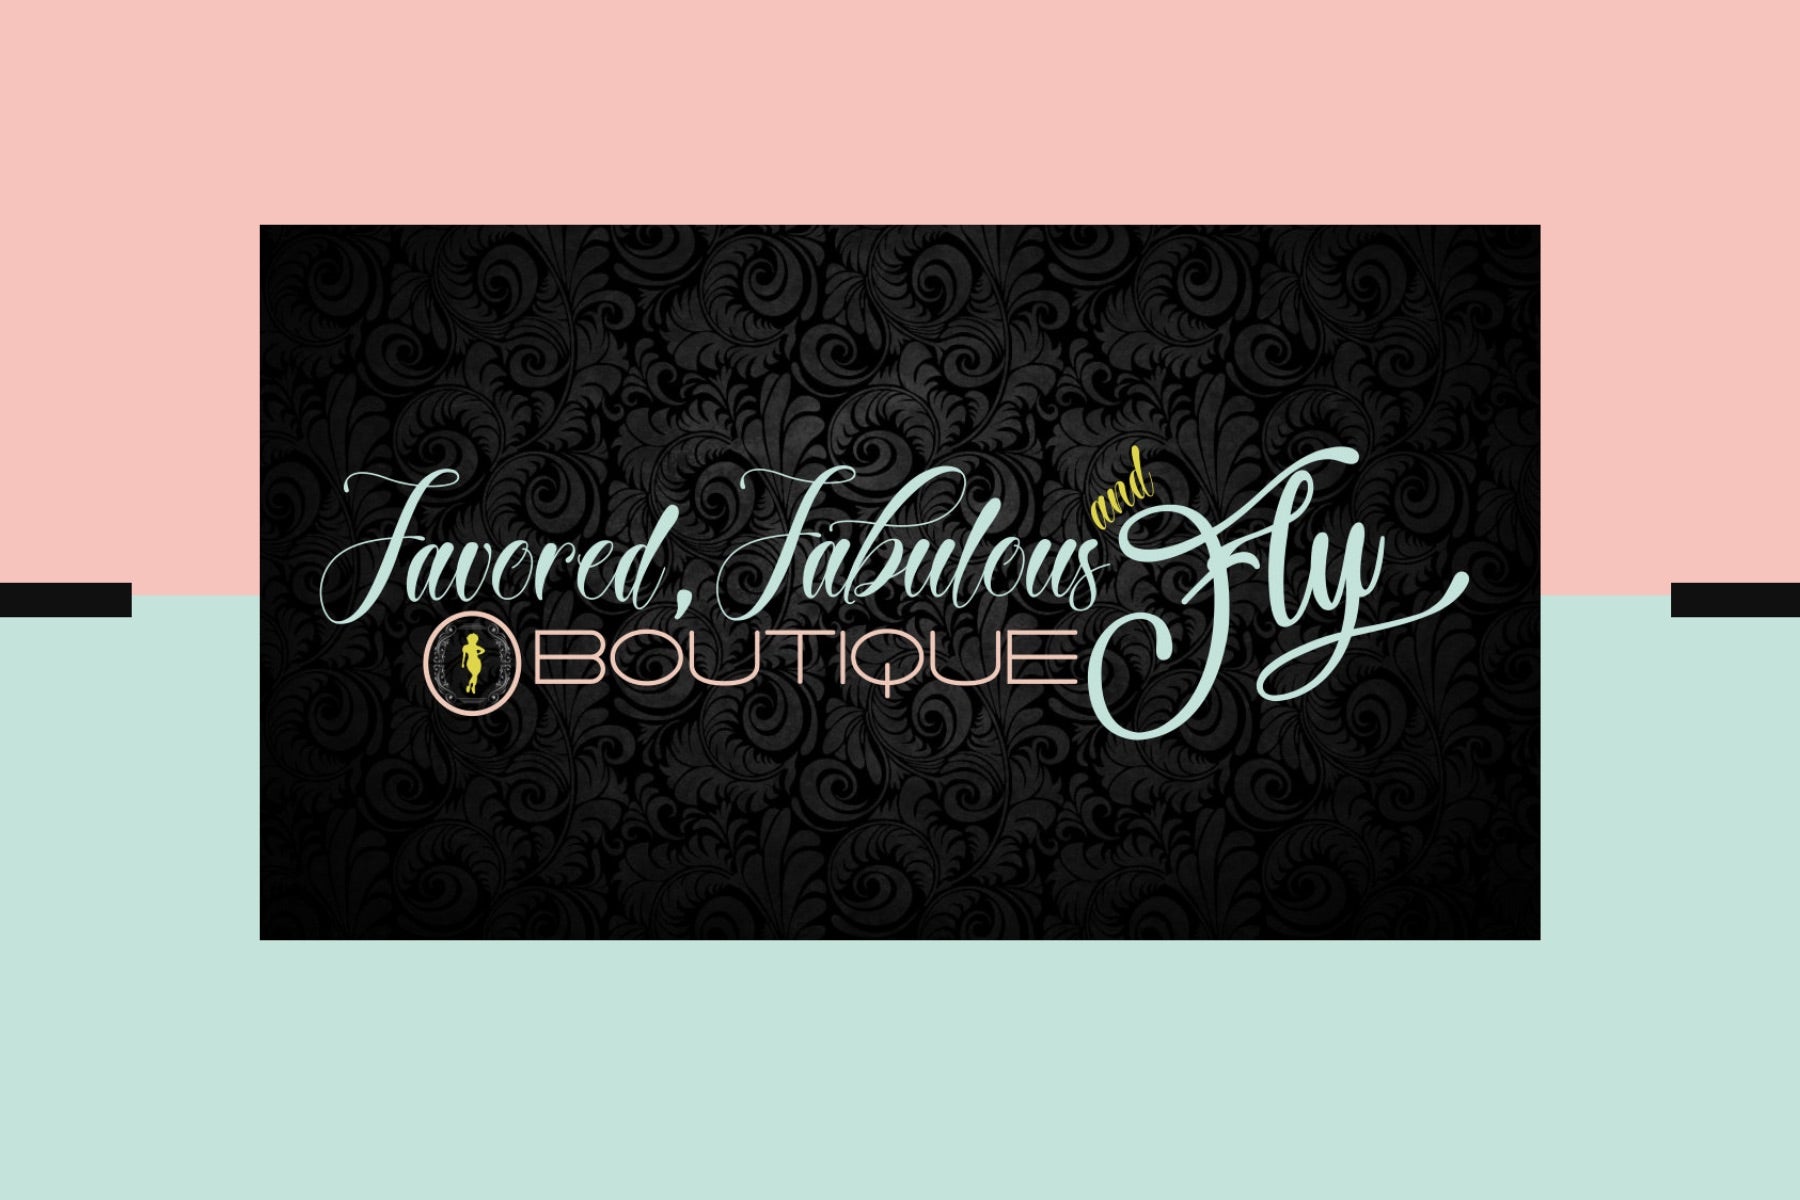 Favored, Fabulous & Fly Boutique, LLC